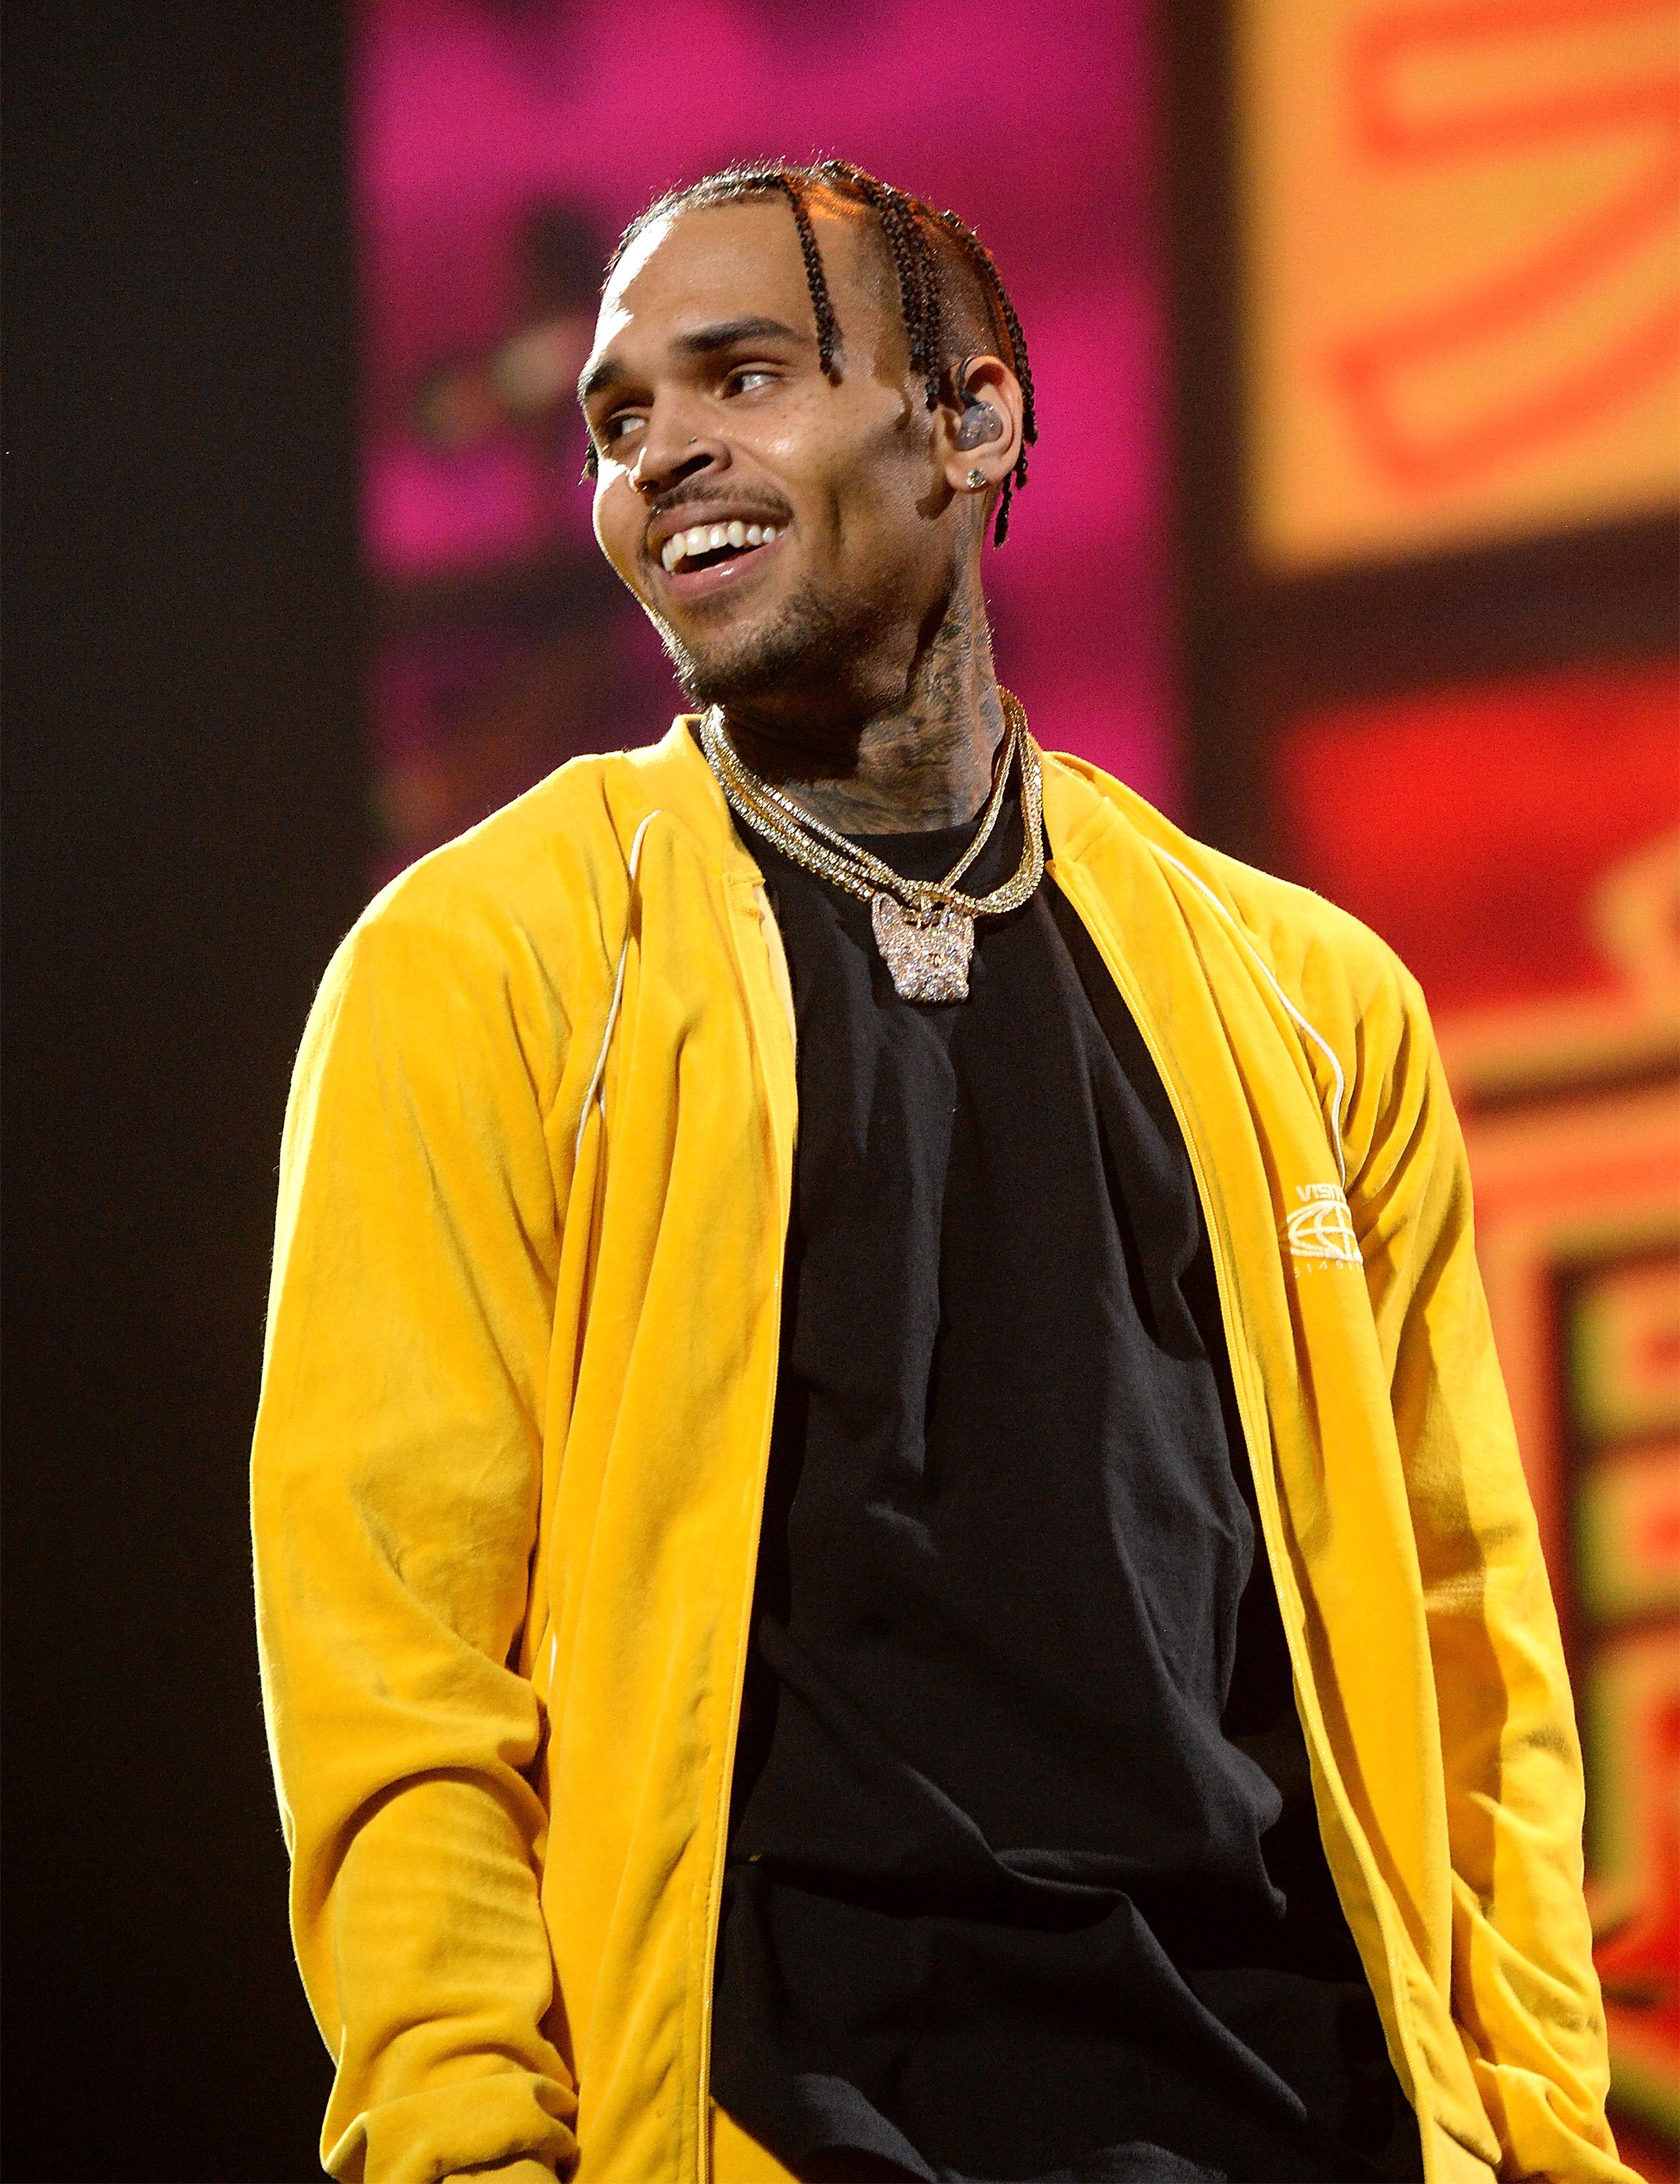 Chris Brown performing at TIDAL X: Brooklyn at Barclays Center of Brooklyn on October 17, 2017. |Photo: Getty Images